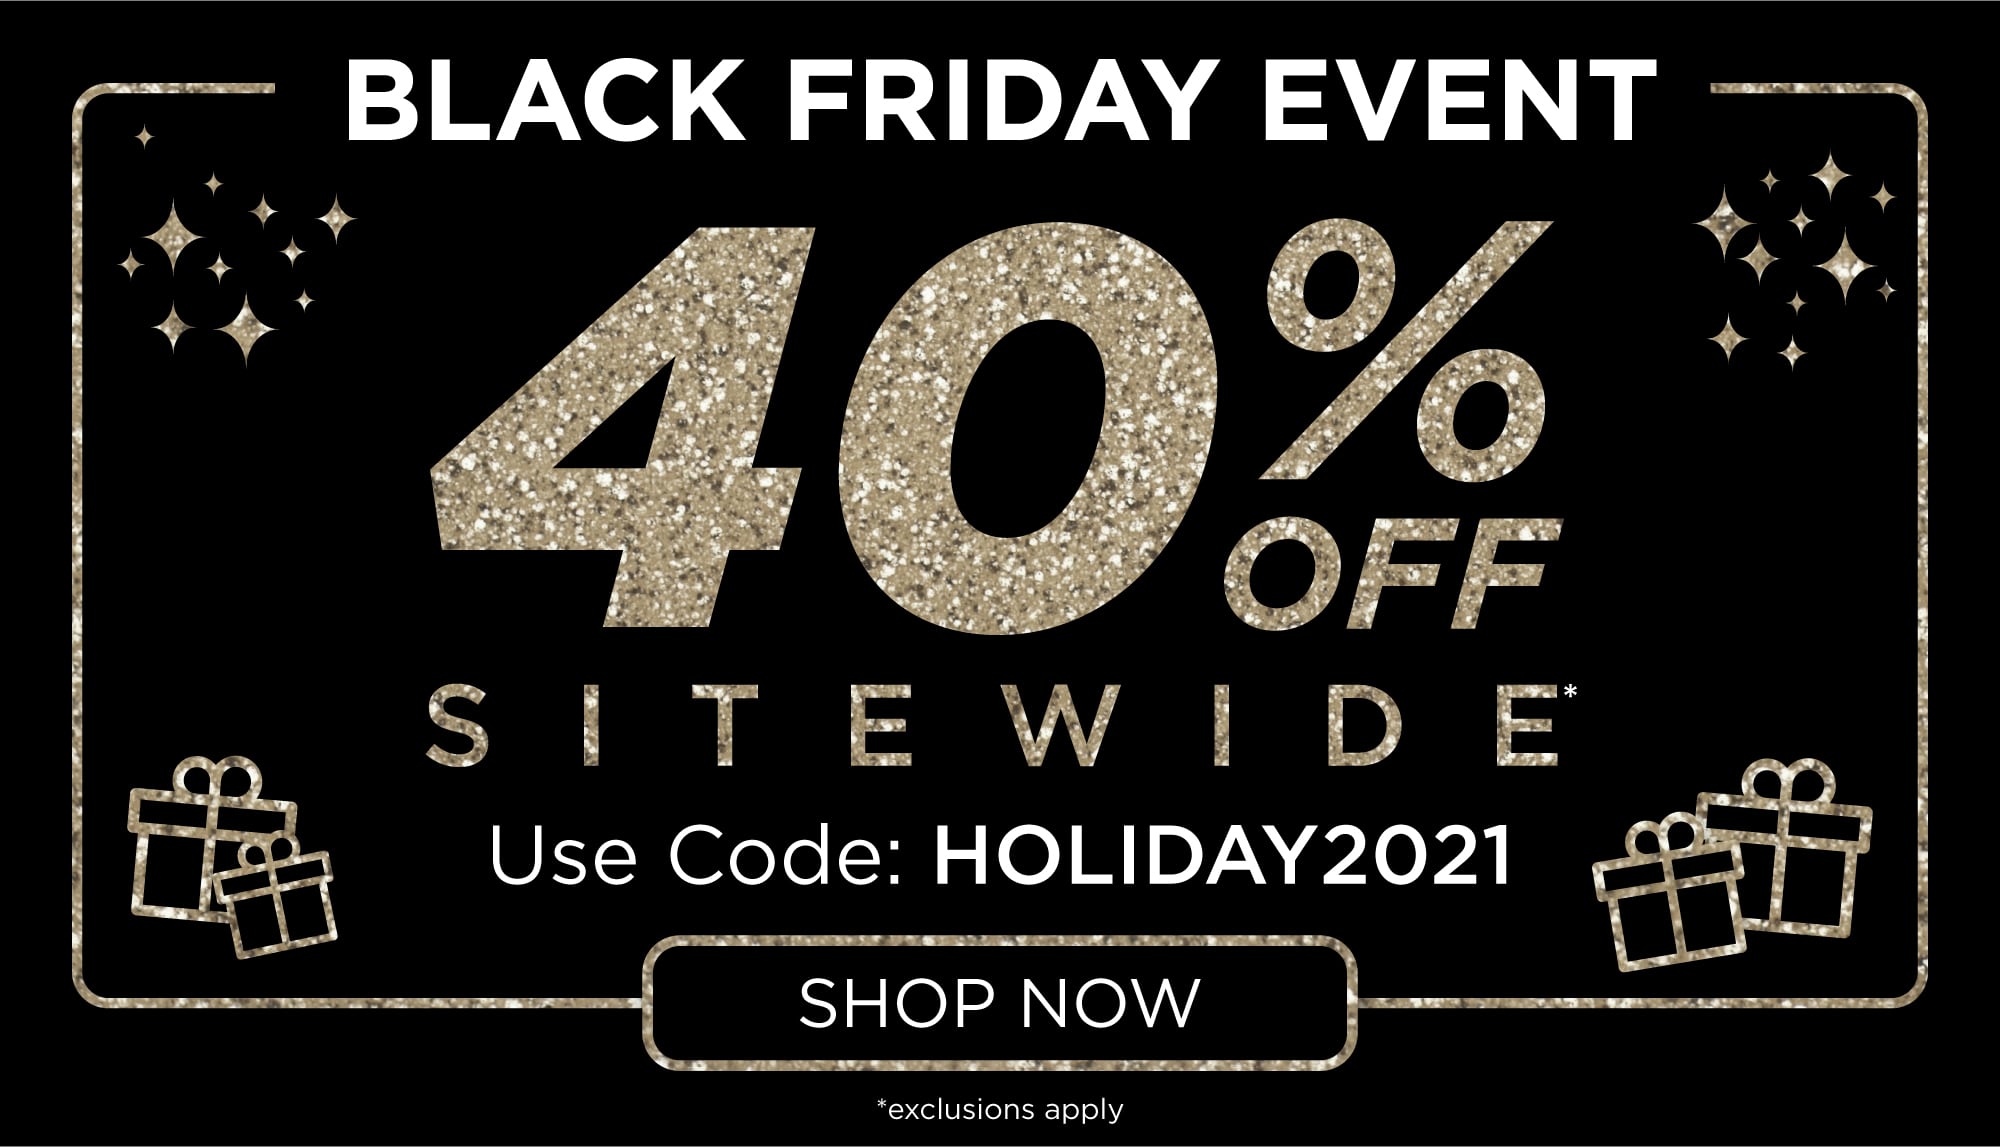 Black Friday Event | 40% Off Sitewide* - Use Code: HOLIDAY2021 | *exclusions apply